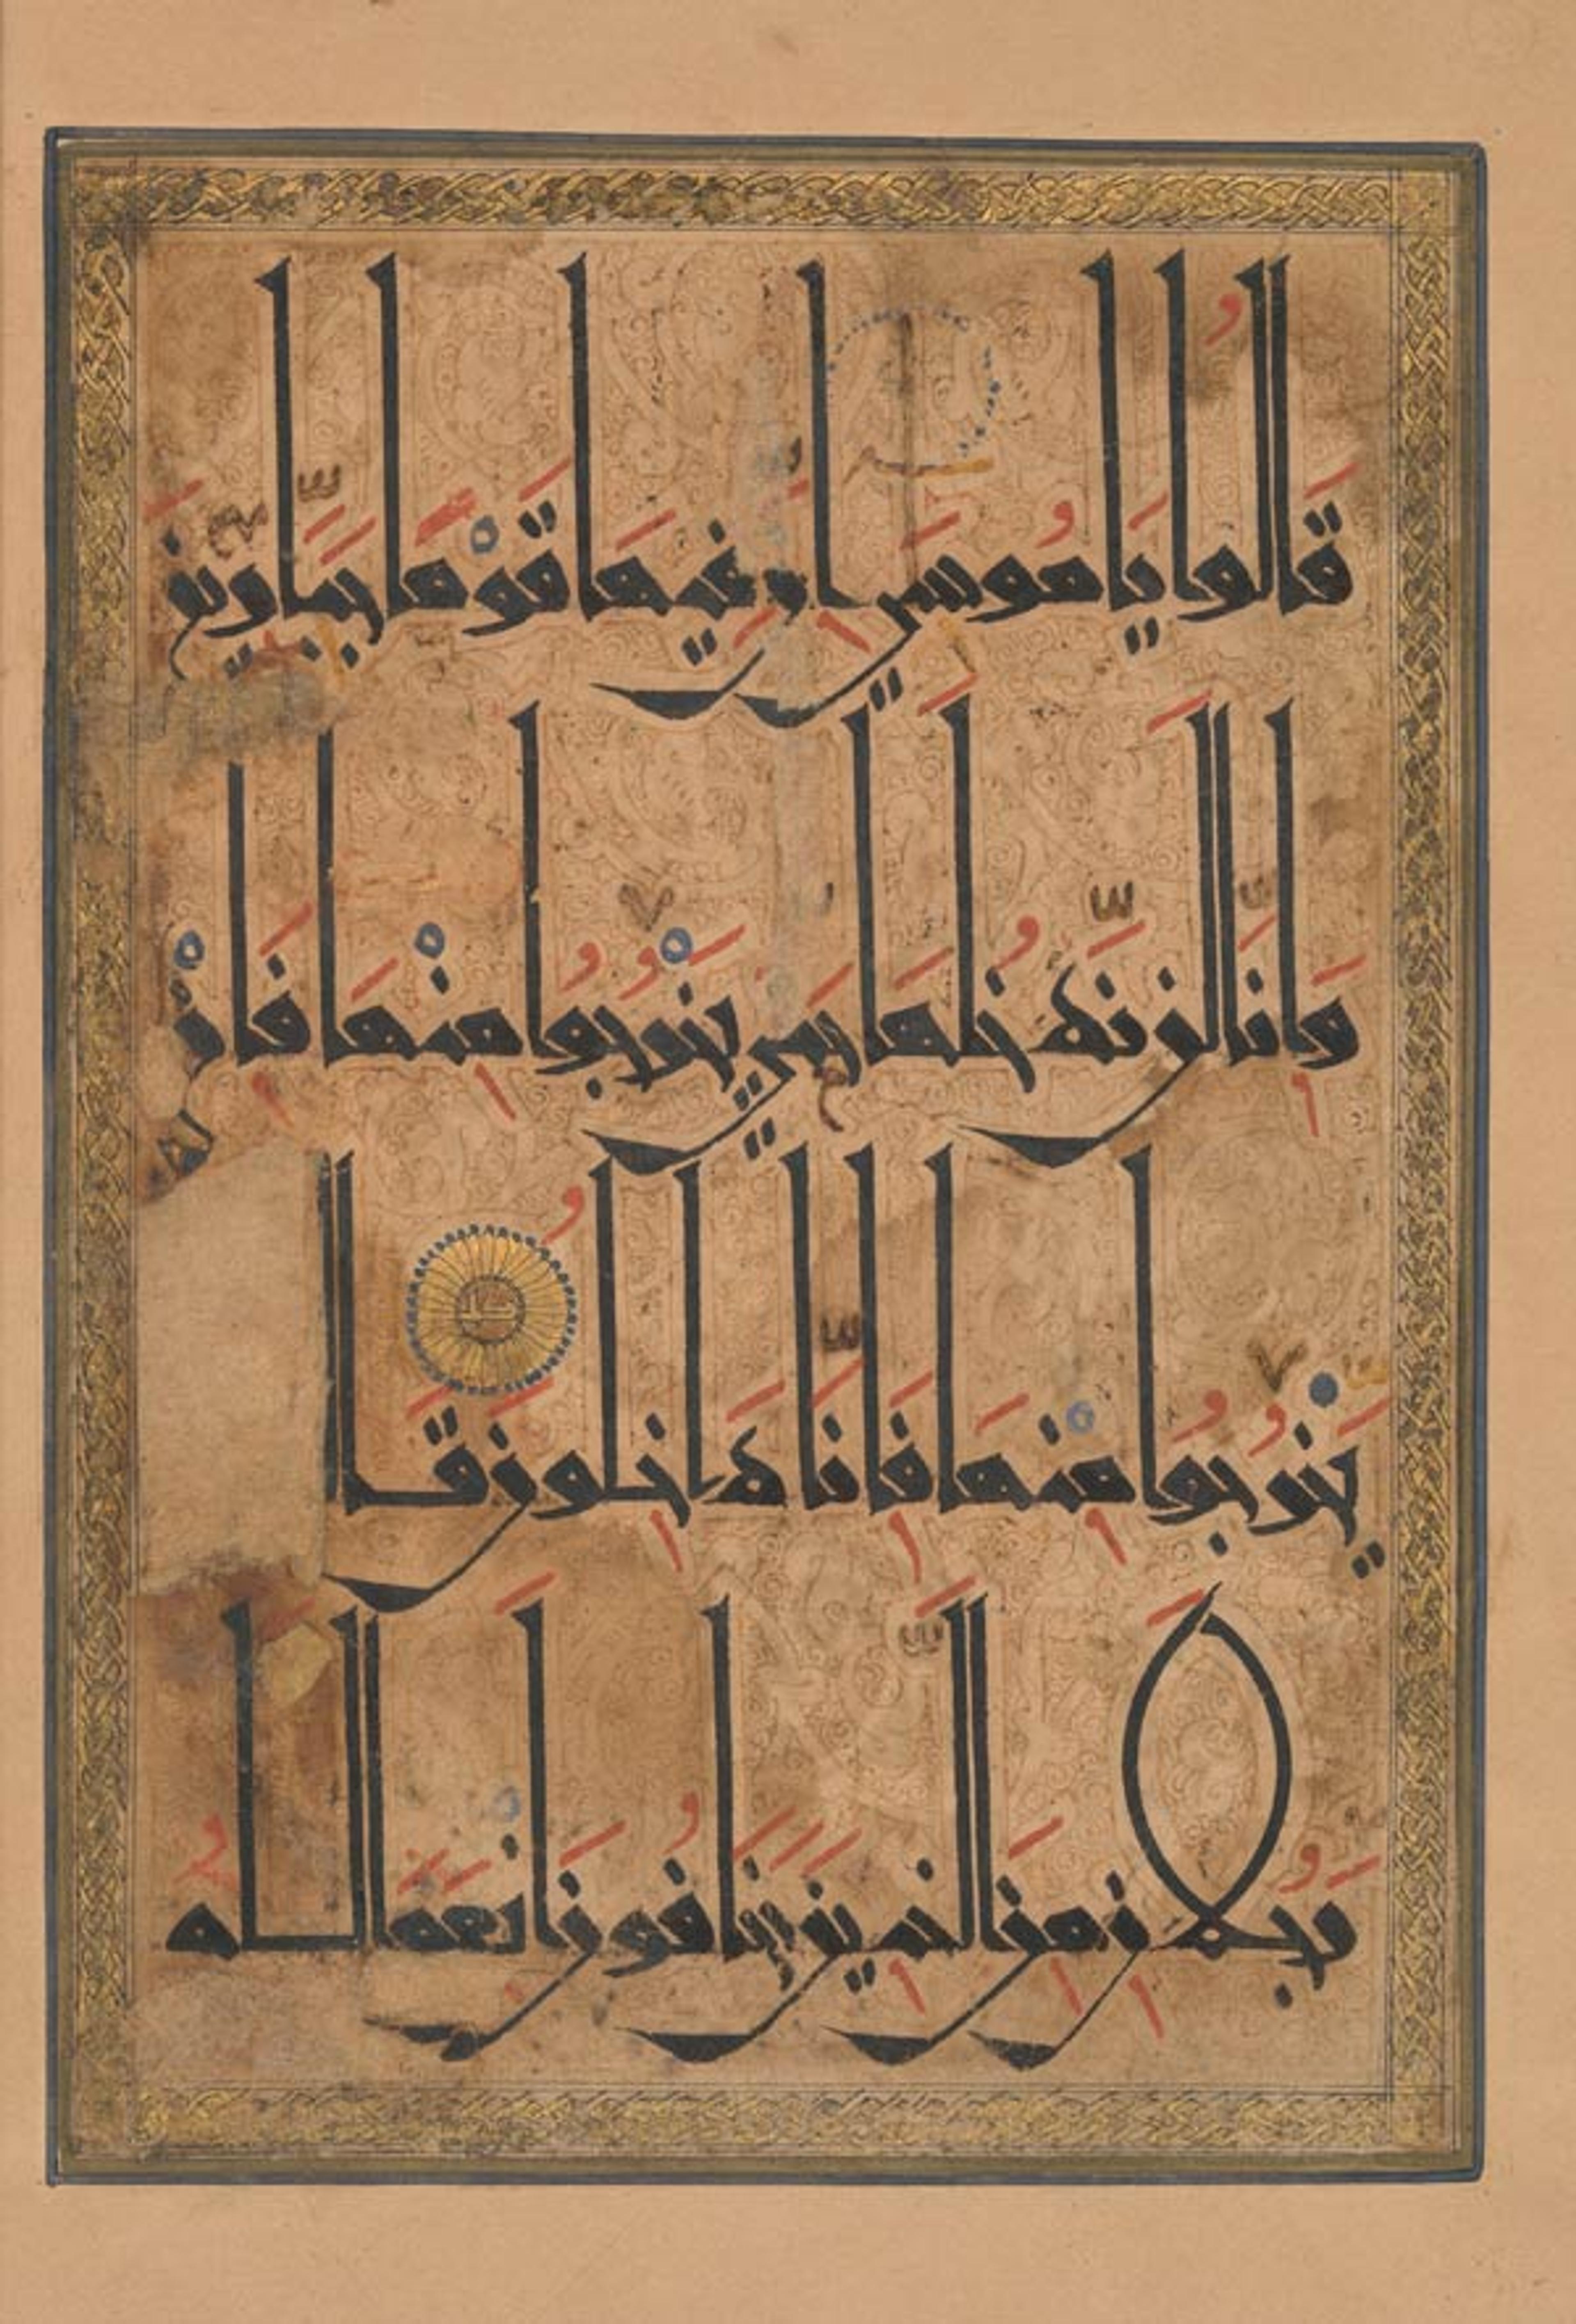 Folio from a Qur'an Manuscript, ca. 1180. Eastern Iran or present-day Afghanistan, Islamic. Ink, opaque watercolor, and gold on paper; 11 3/4 x 8 3/4 in. (29.8 x 22.2 cm). The Metropolitan Museum of Art, New York, H. O. Havemeyer Collection, Gift of Horace Havemeyer, 1929 (29.160.25)